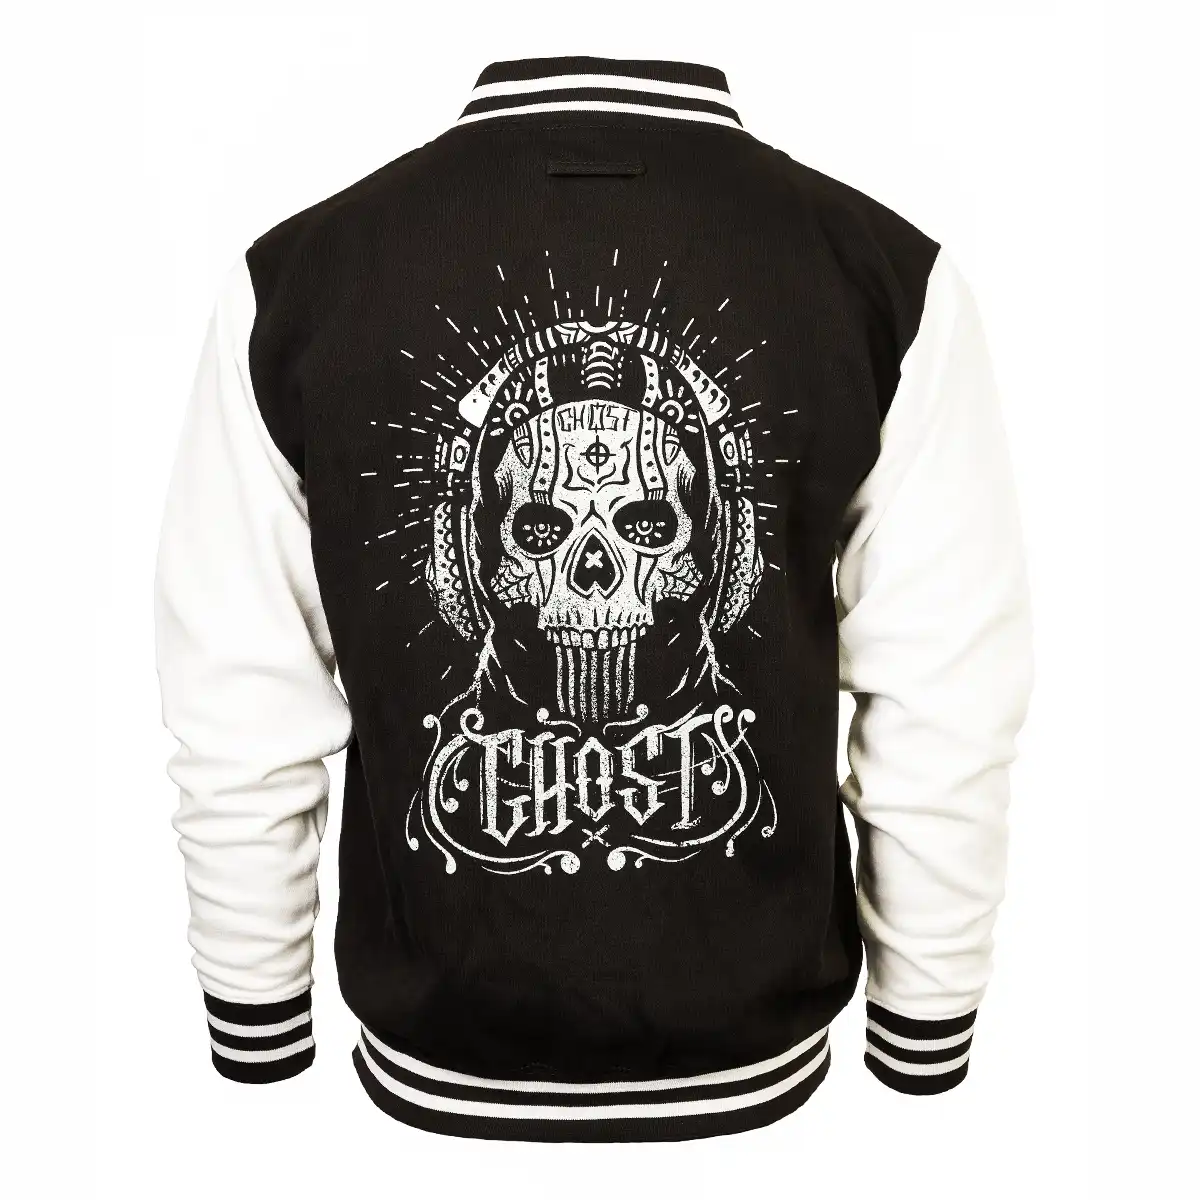 Call of Duty College Jacket "Ghost" Black/White M Image 2